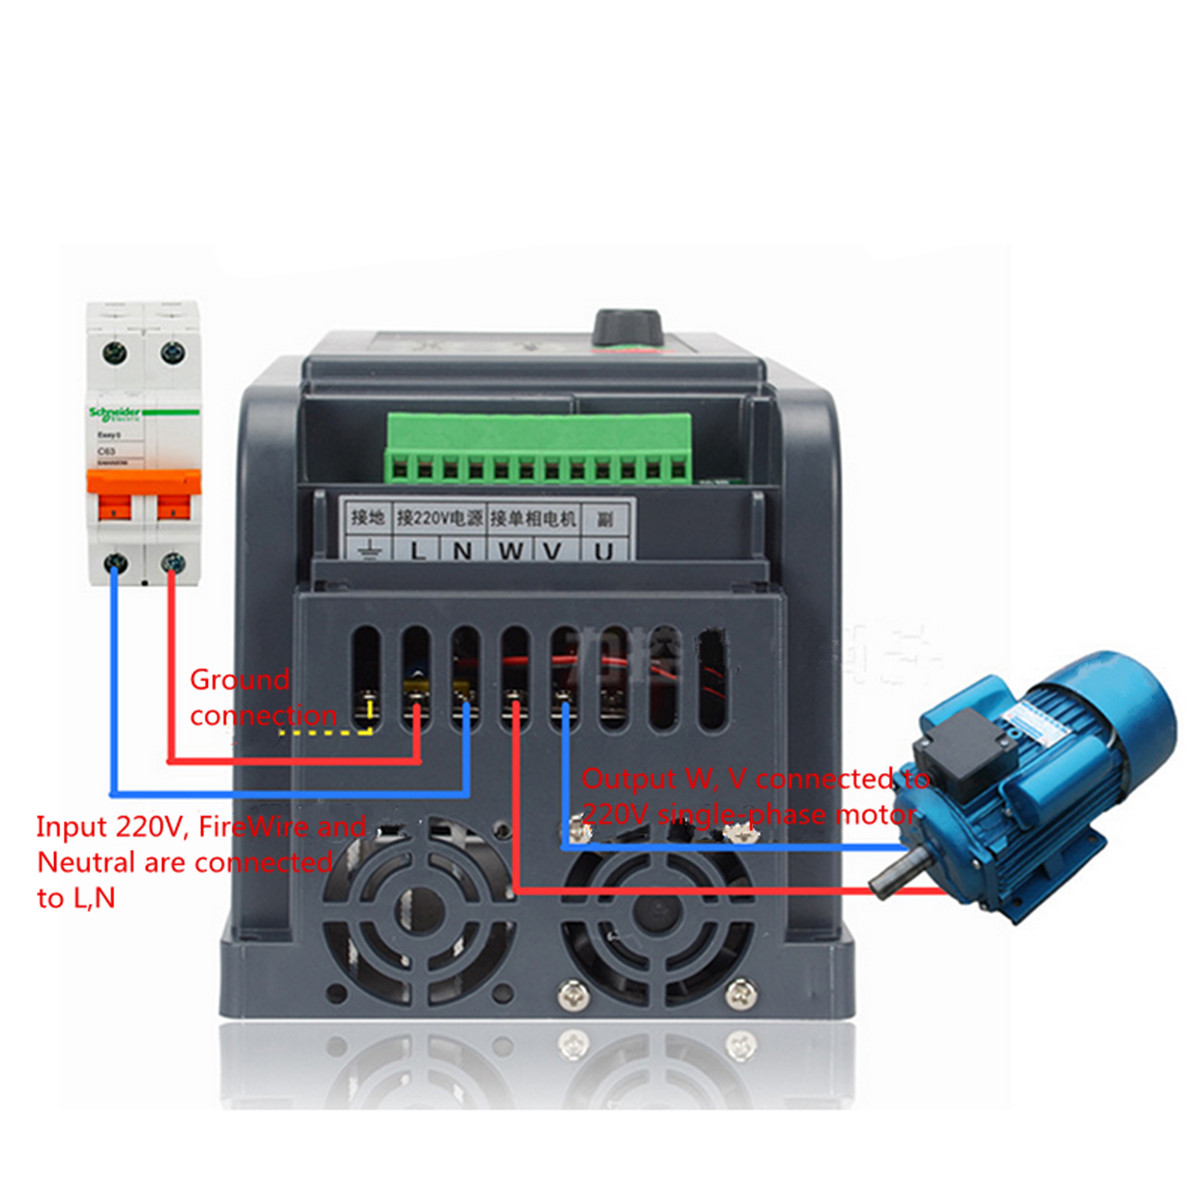 075kw-220V-Variable-Frequency-Inverter-Controller-Single-Phrase-Frequency-Converter-1305356